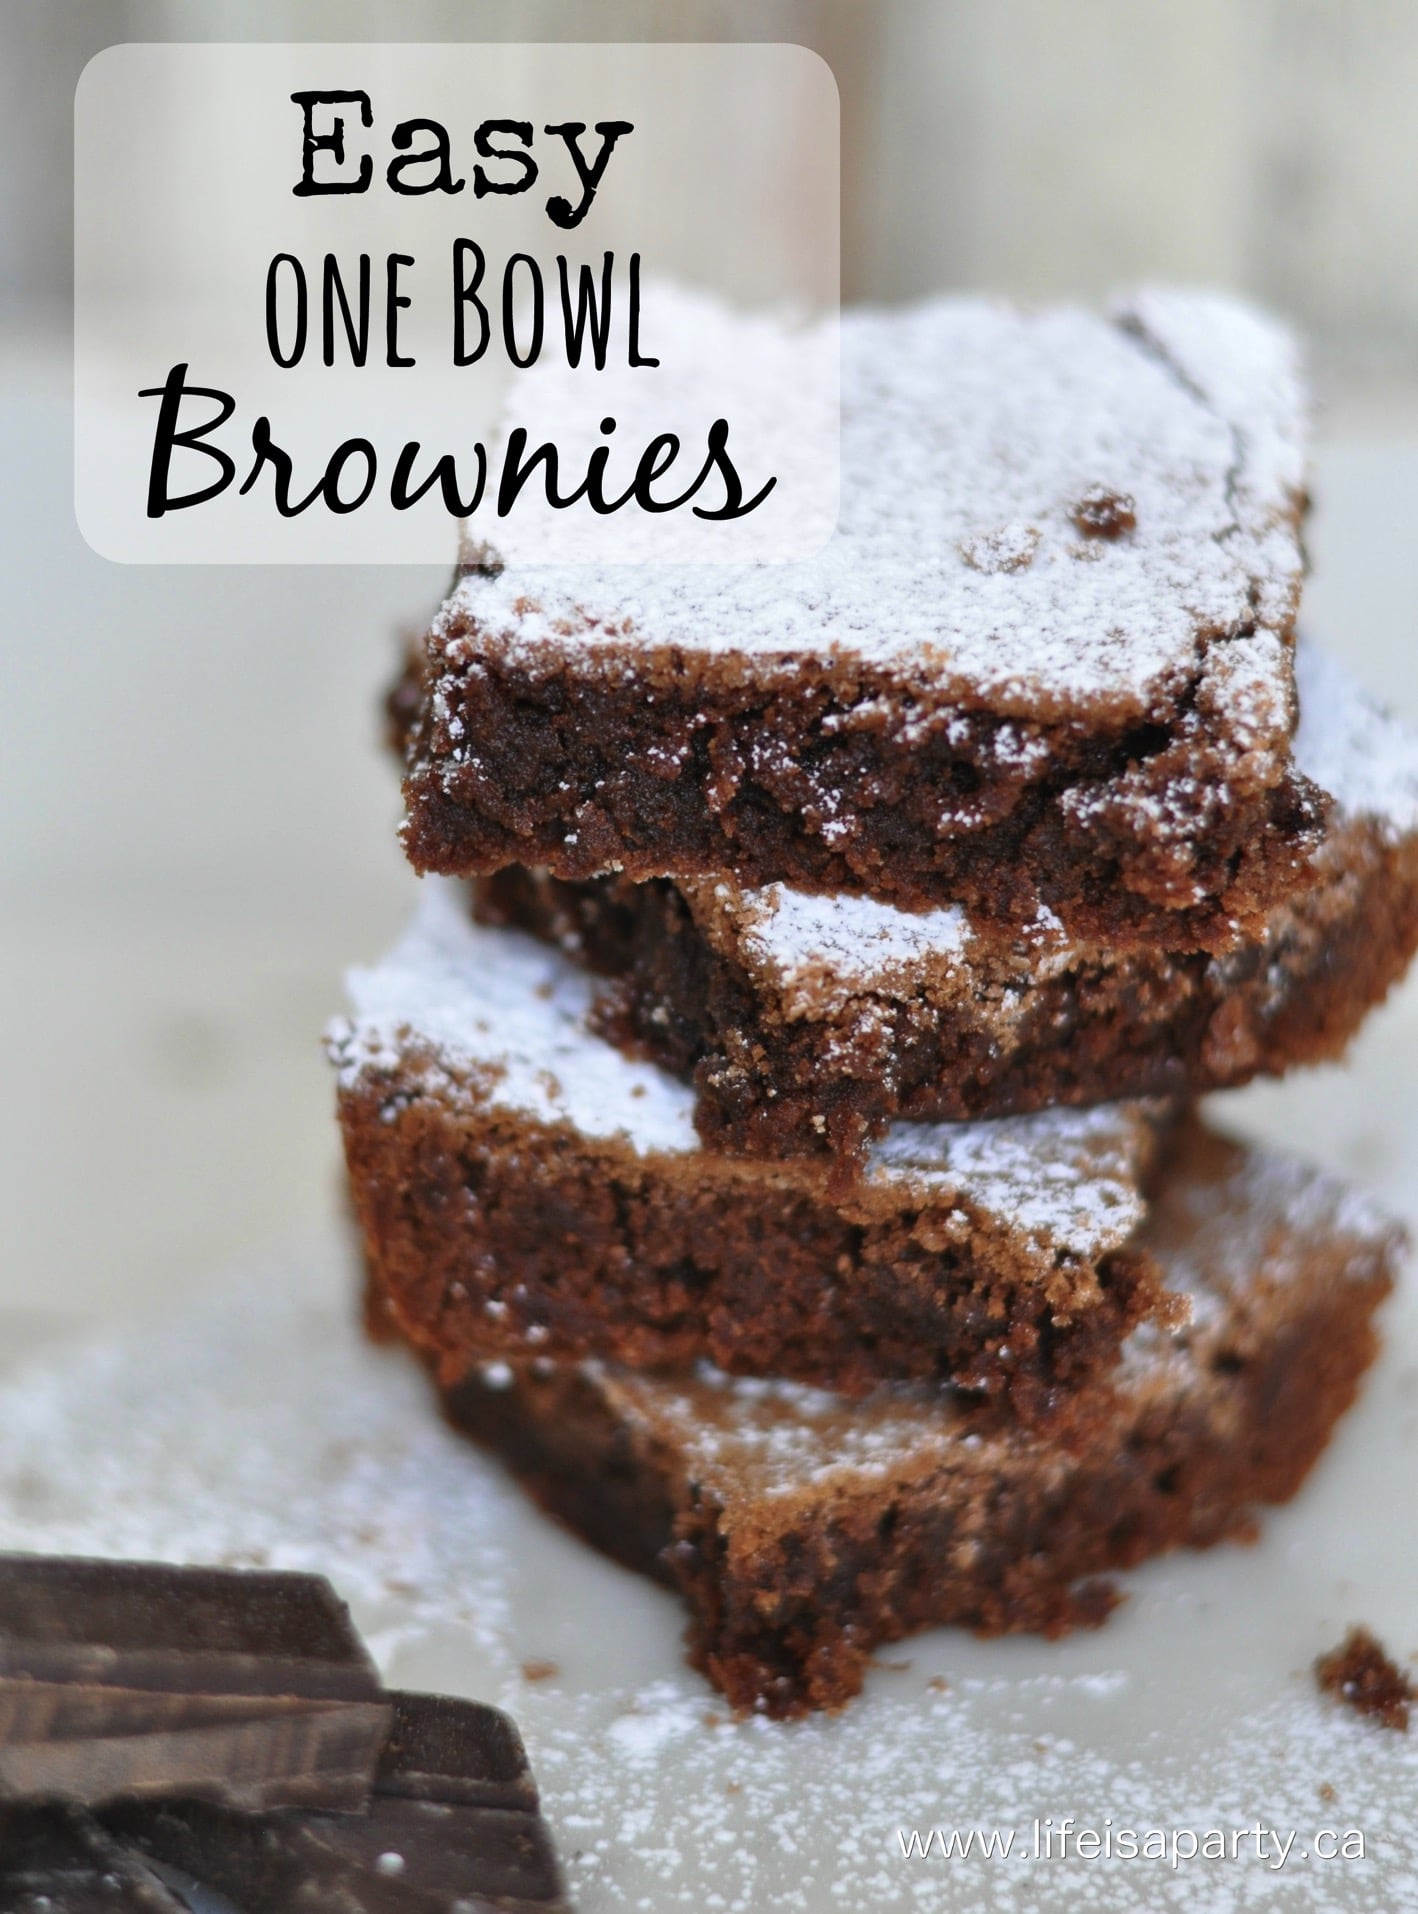 Easy One Bowl Brownies: easy to make, simple ingredients you already have in your pantry, and better than a store mix. Promise.